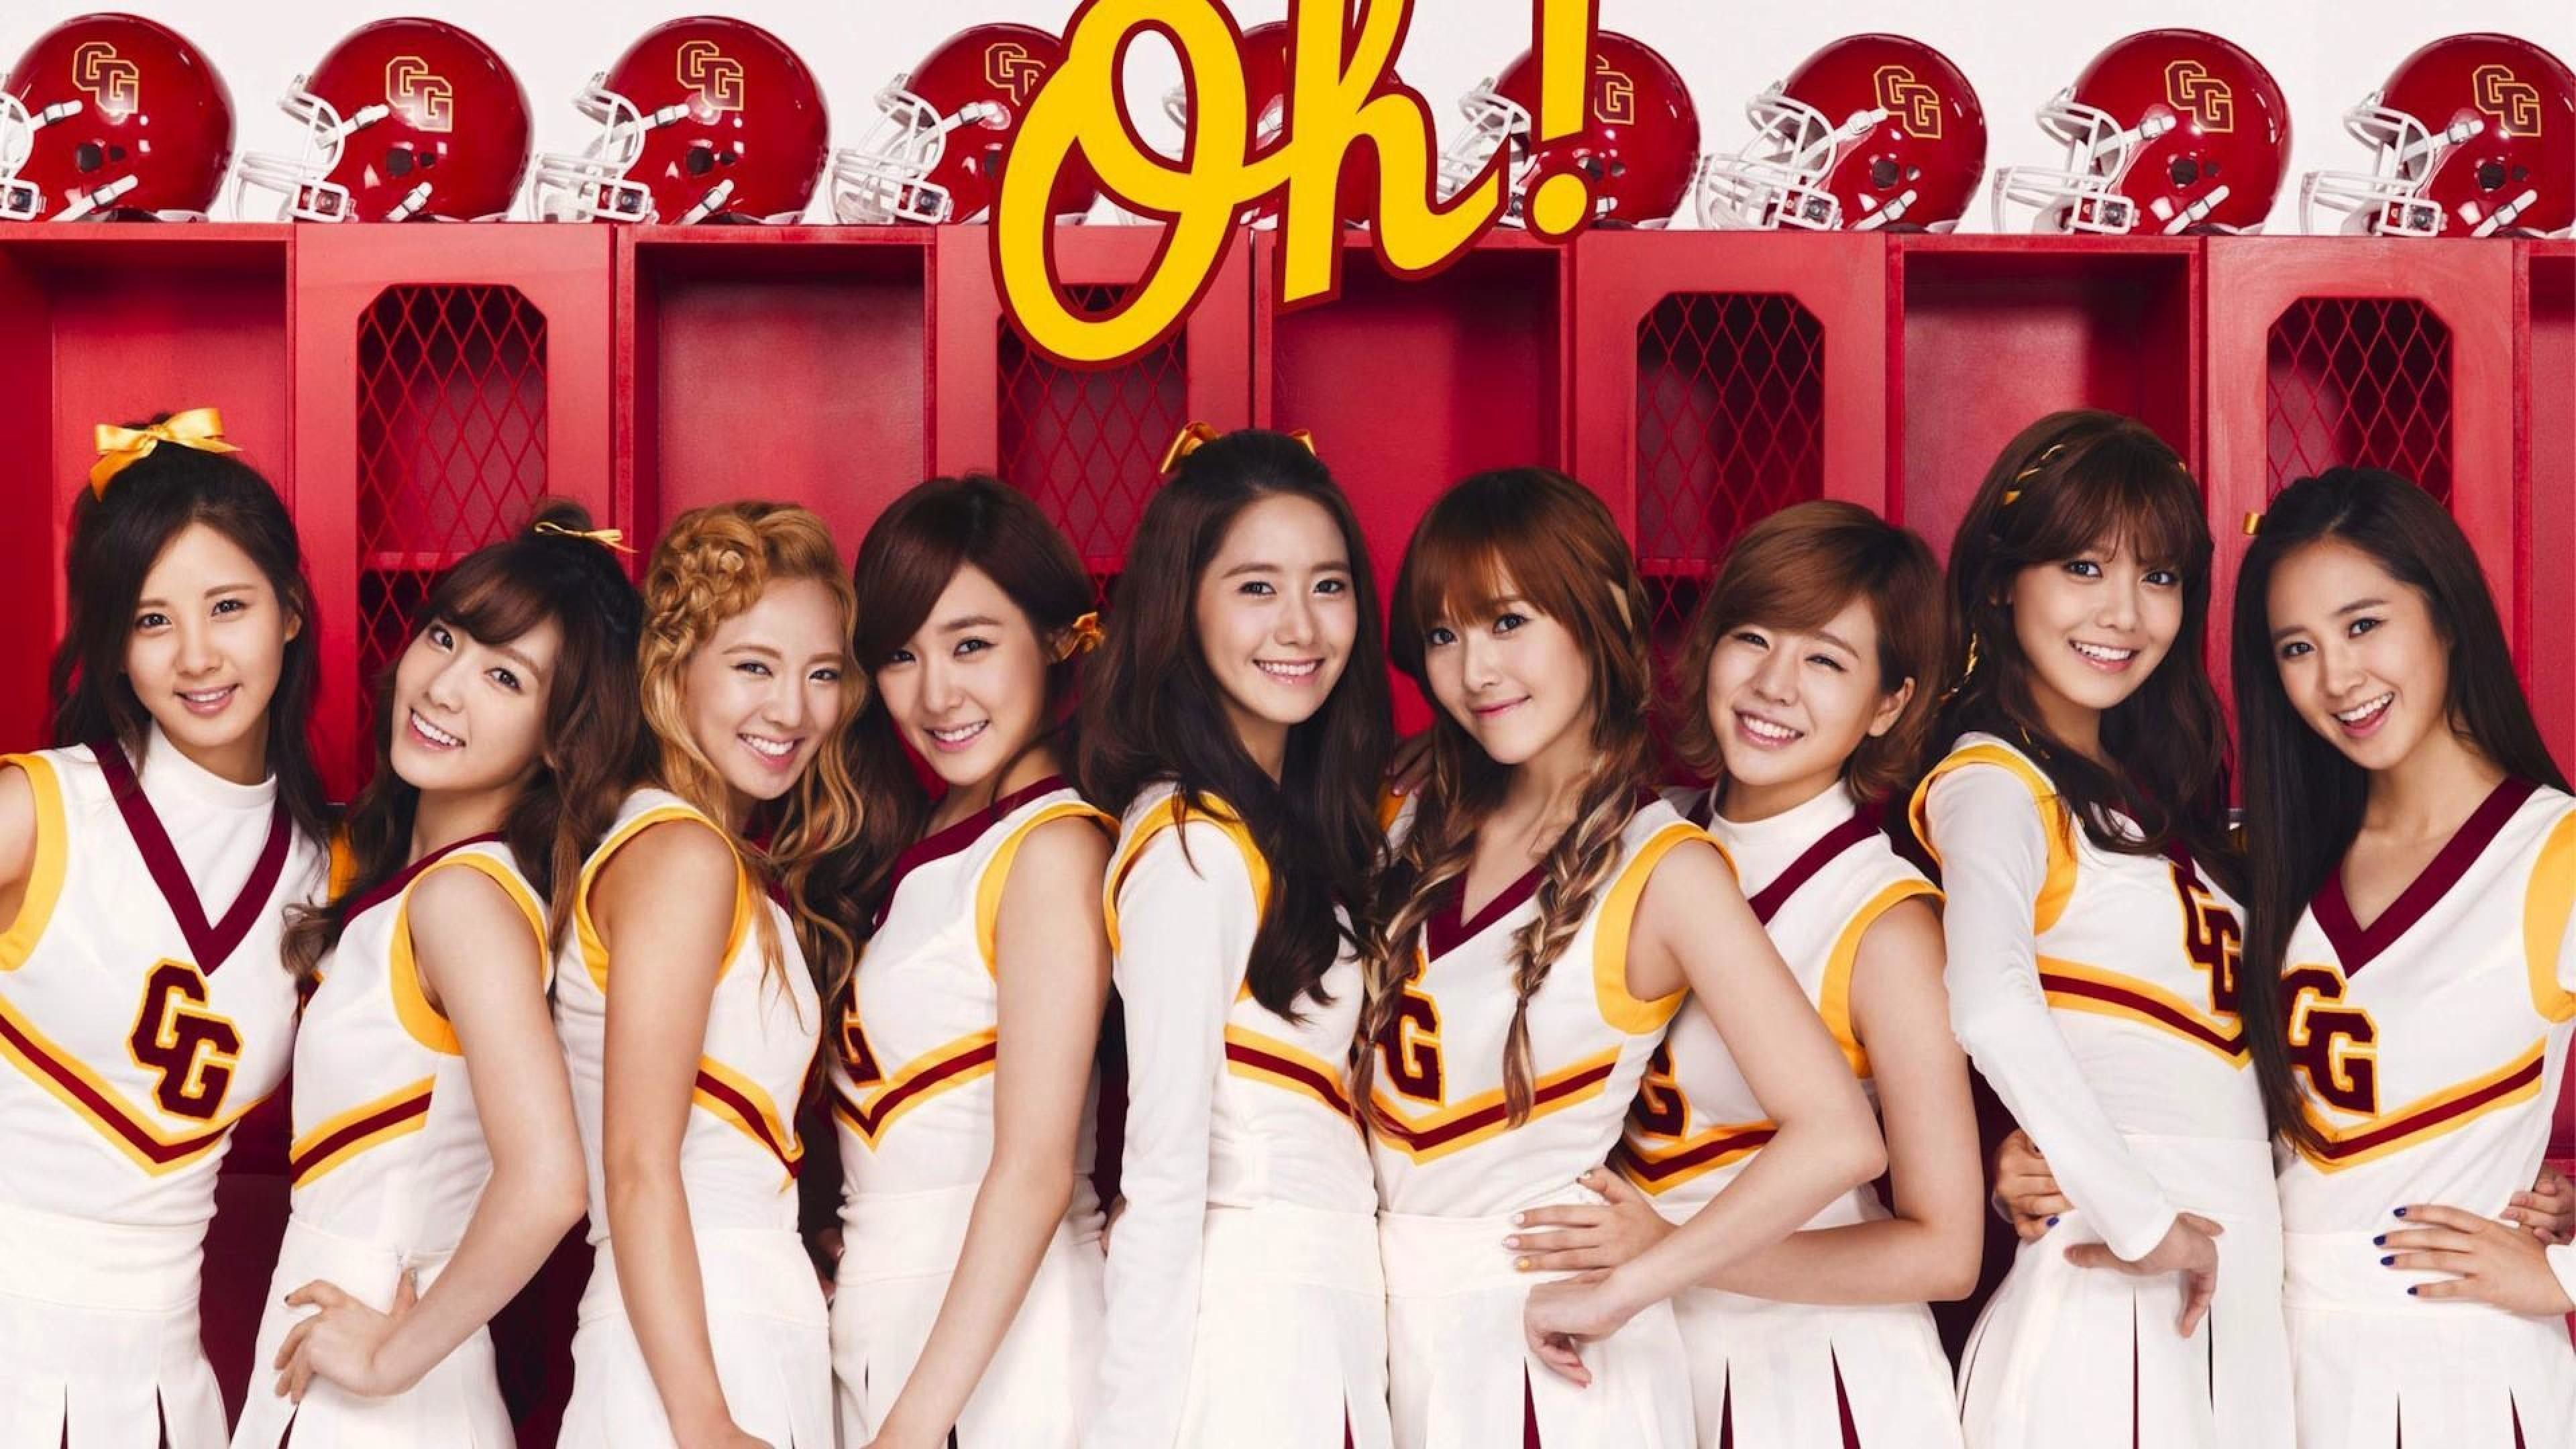 3840x2160 Hd wallpaper kpop - Hd Wallpaper Kpop Wallpaper Wiki Snsd Kpop Background  Pic Wpd002087 Download